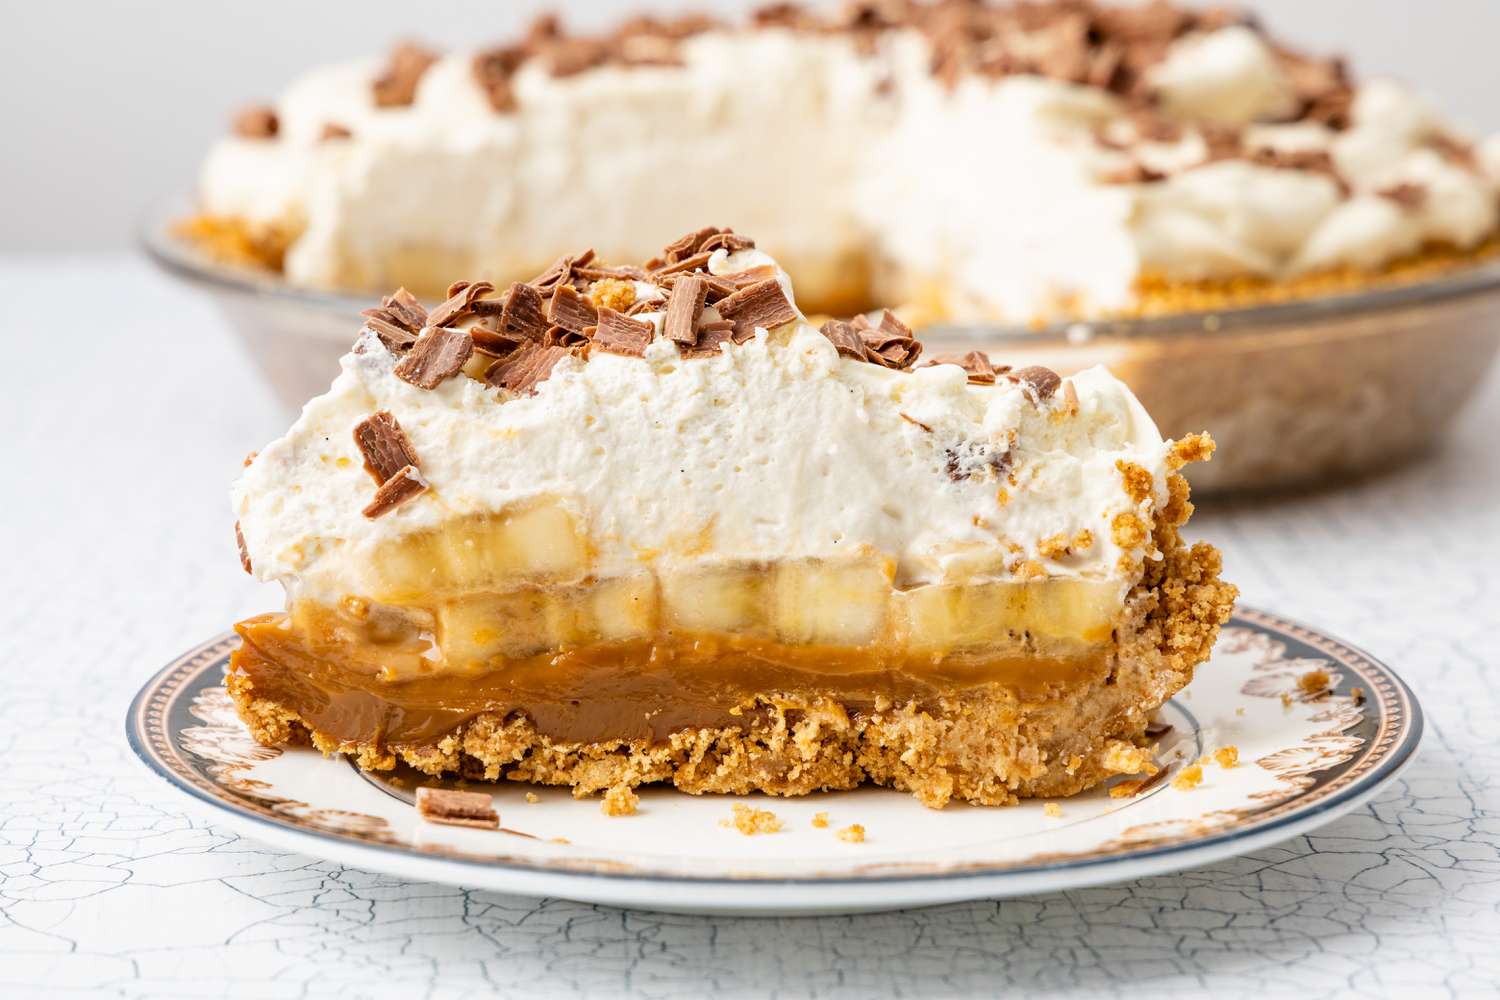 Slice of Banoffee Pie on a Small Plate, and in the Background, More Pie in a Pie Pan